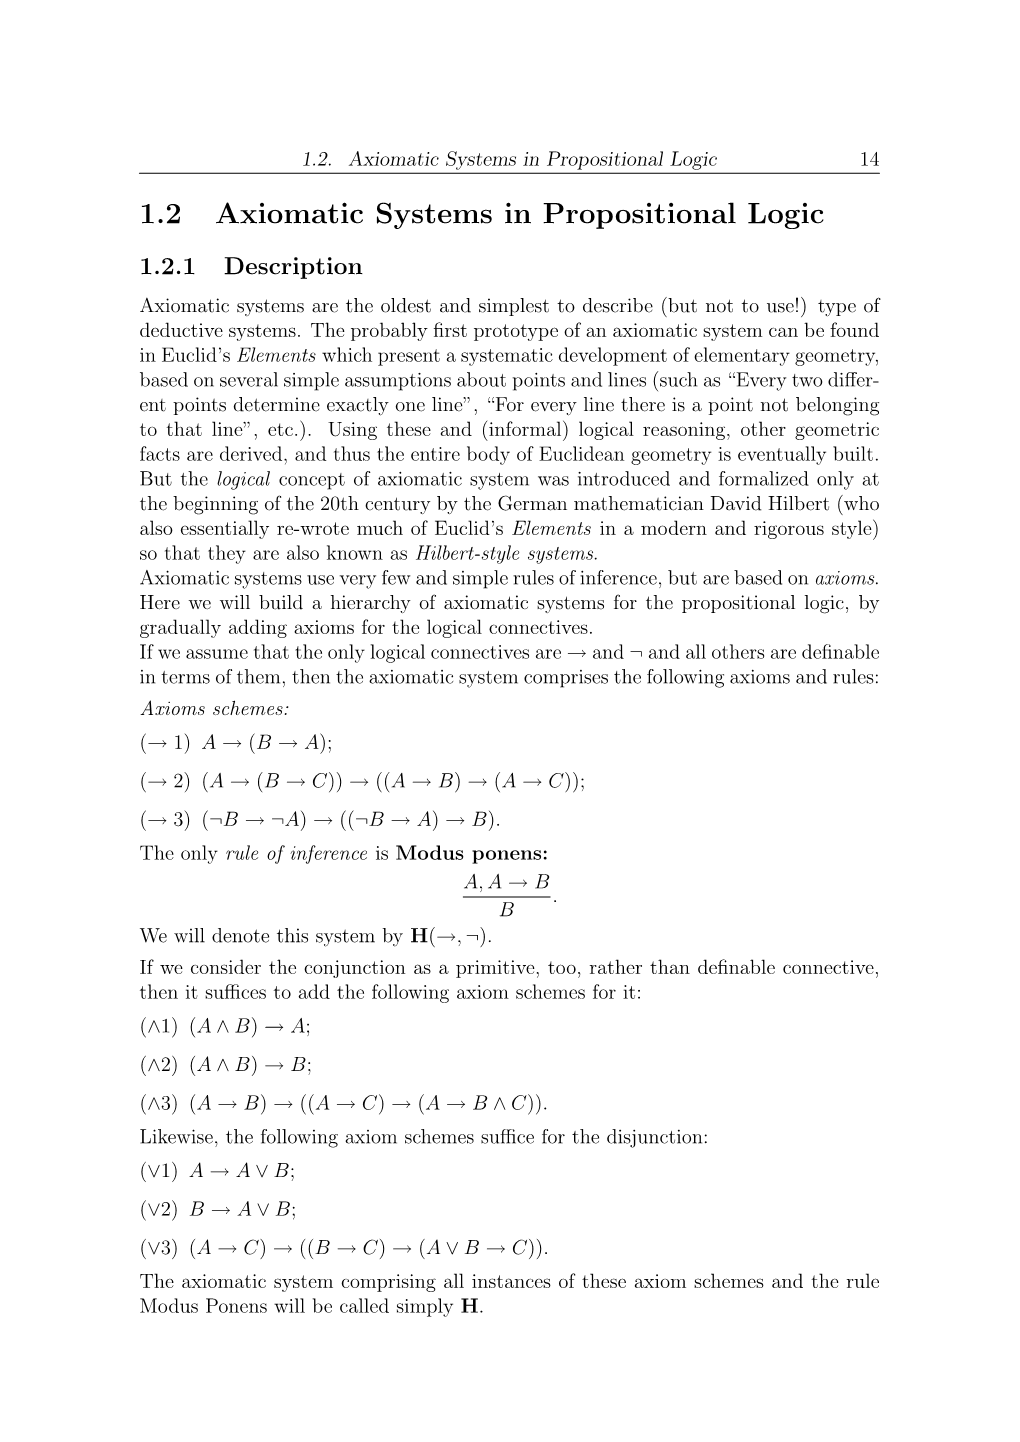 1.2 Axiomatic Systems in Propositional Logic